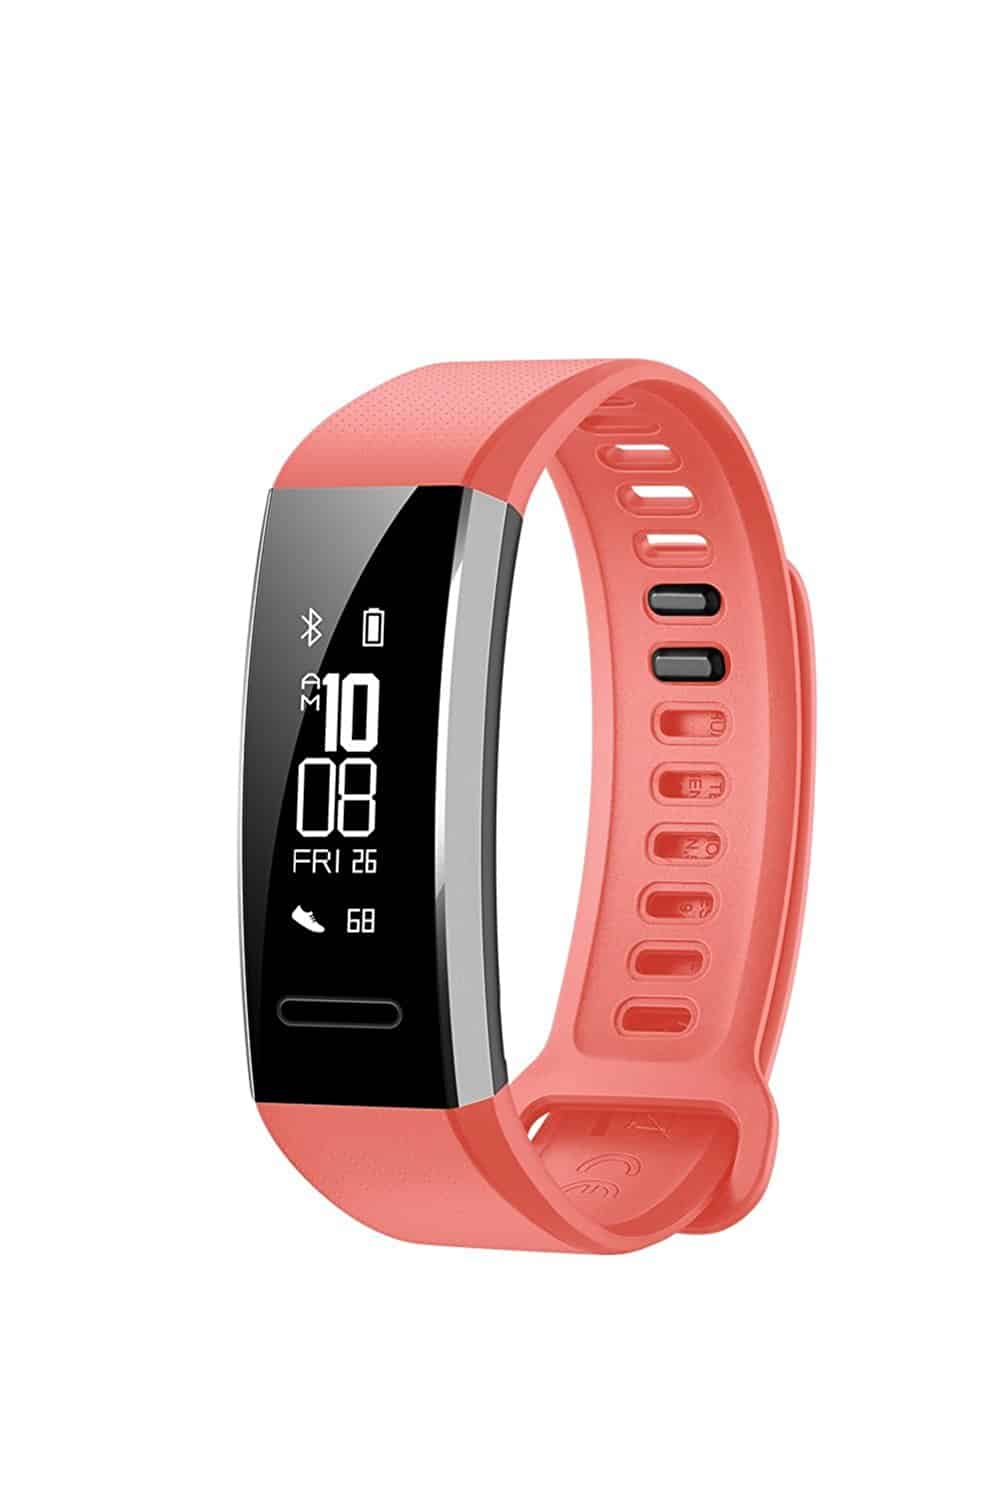 Huawei Band 2 Pro All-in-One Smart Fitness Wristband